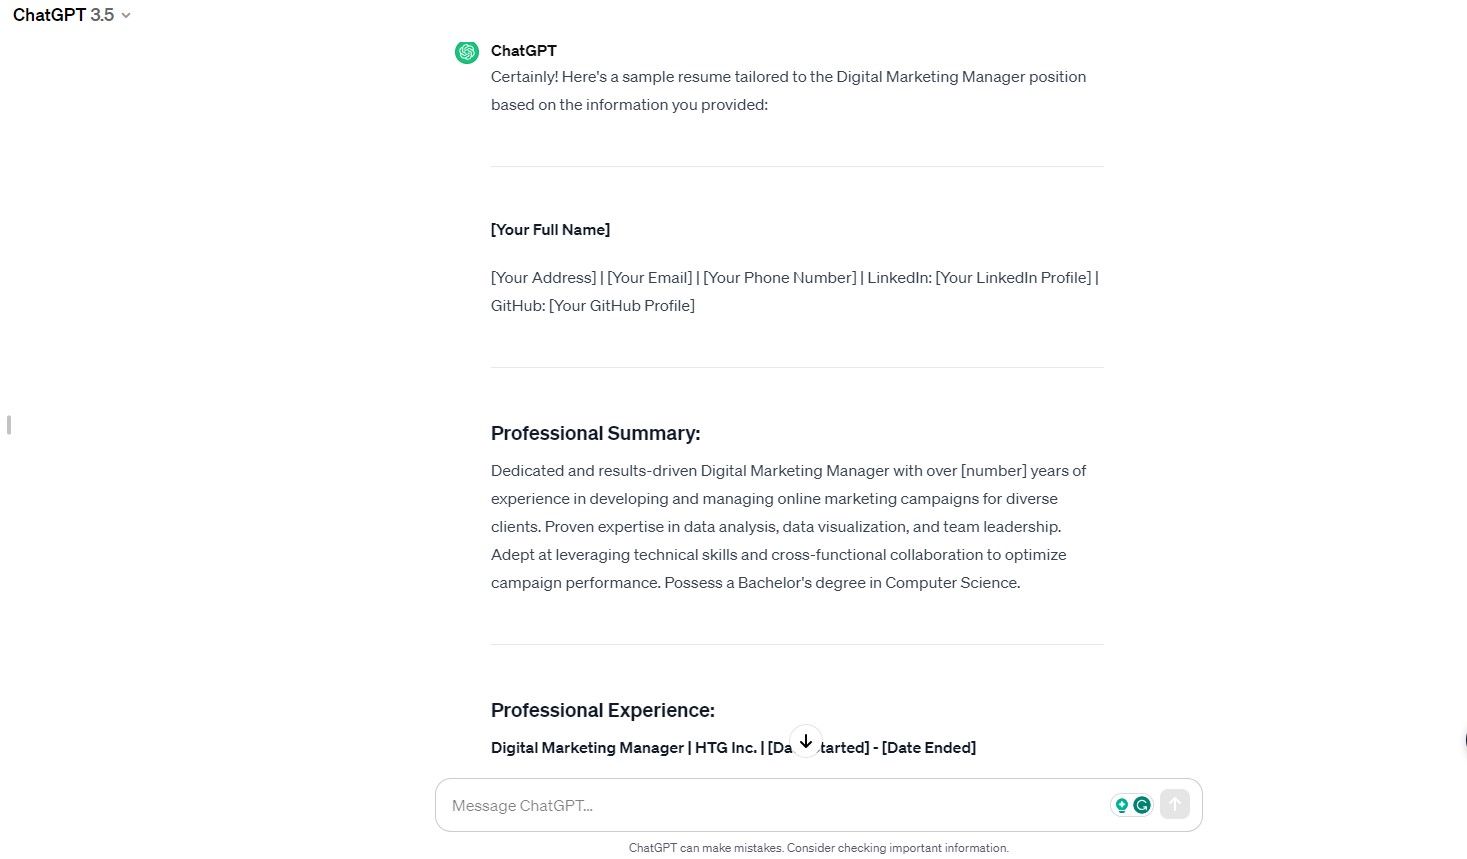 ChatGPT-crafted resume based on prompting